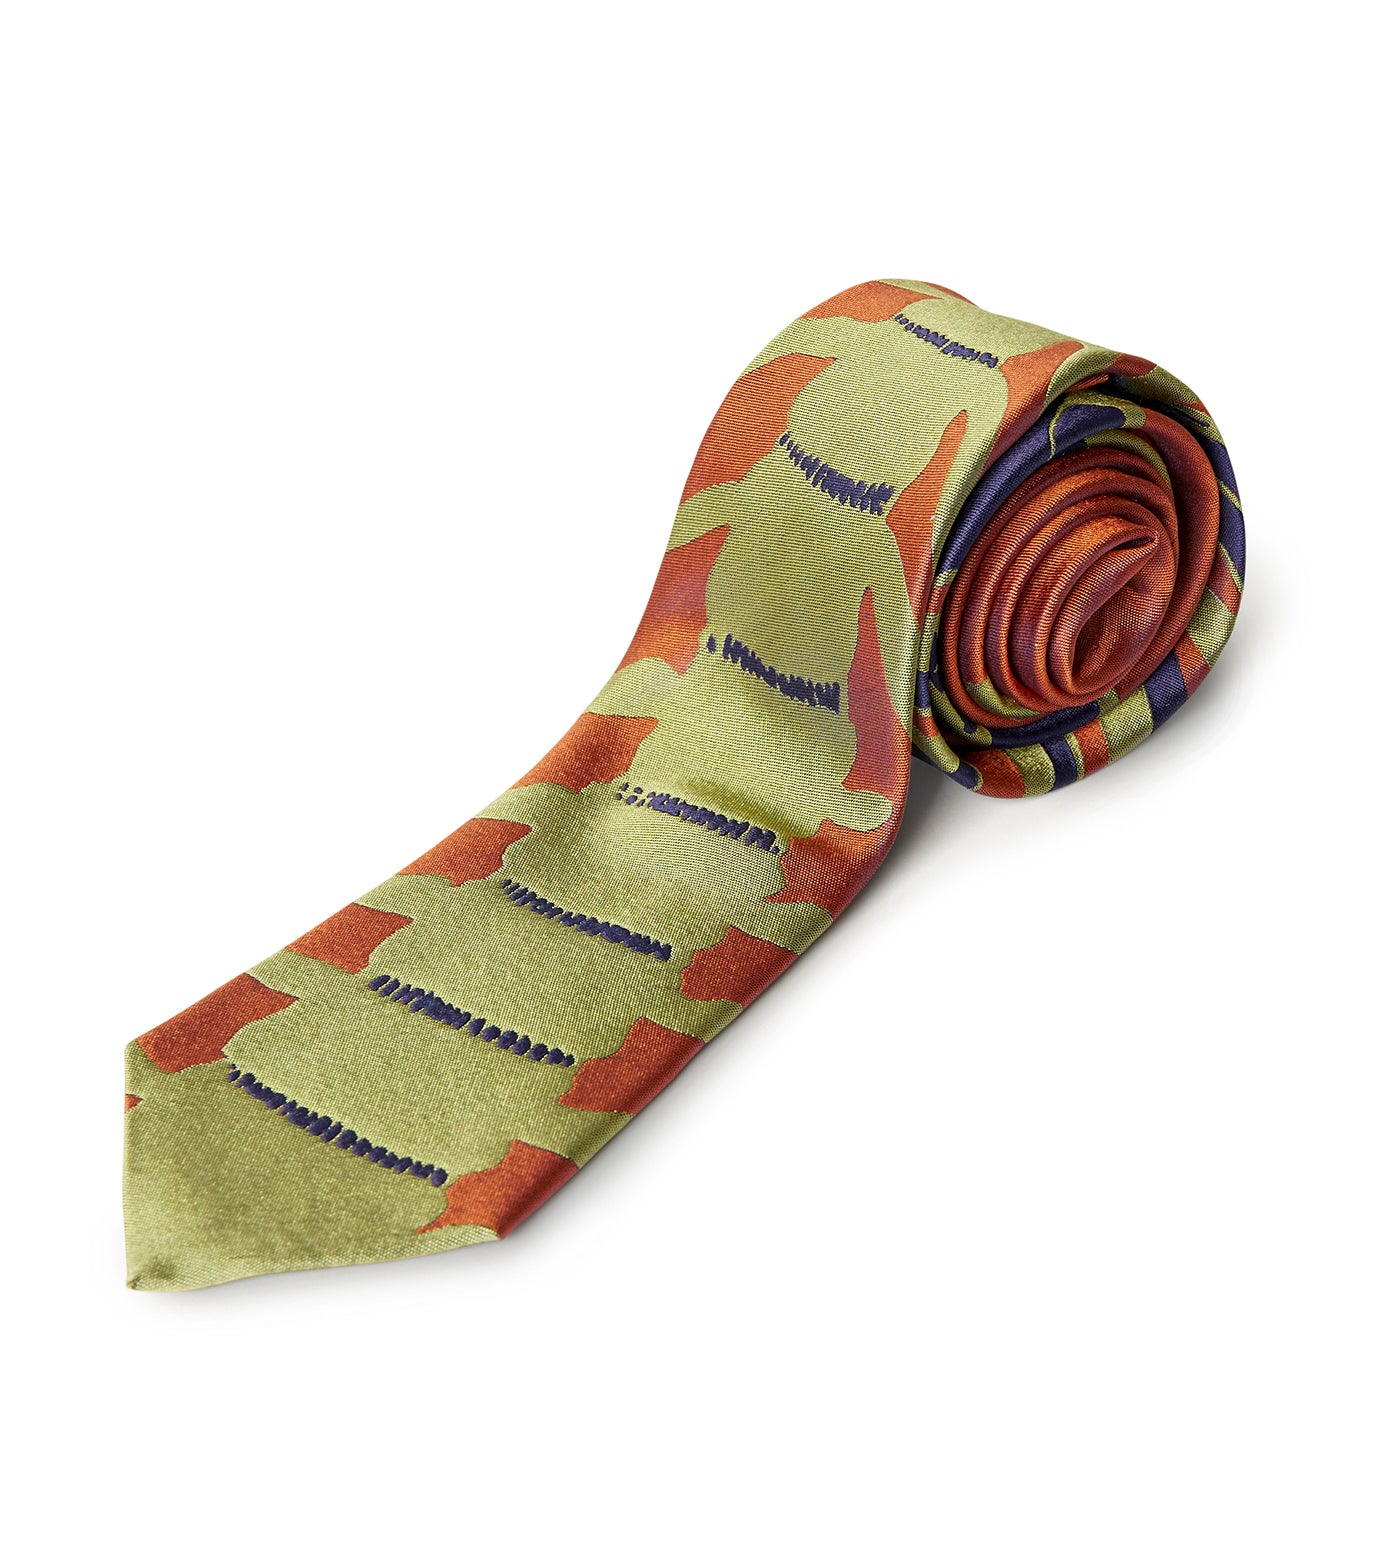 THE FOLLOWING WEDNESDAY TIE